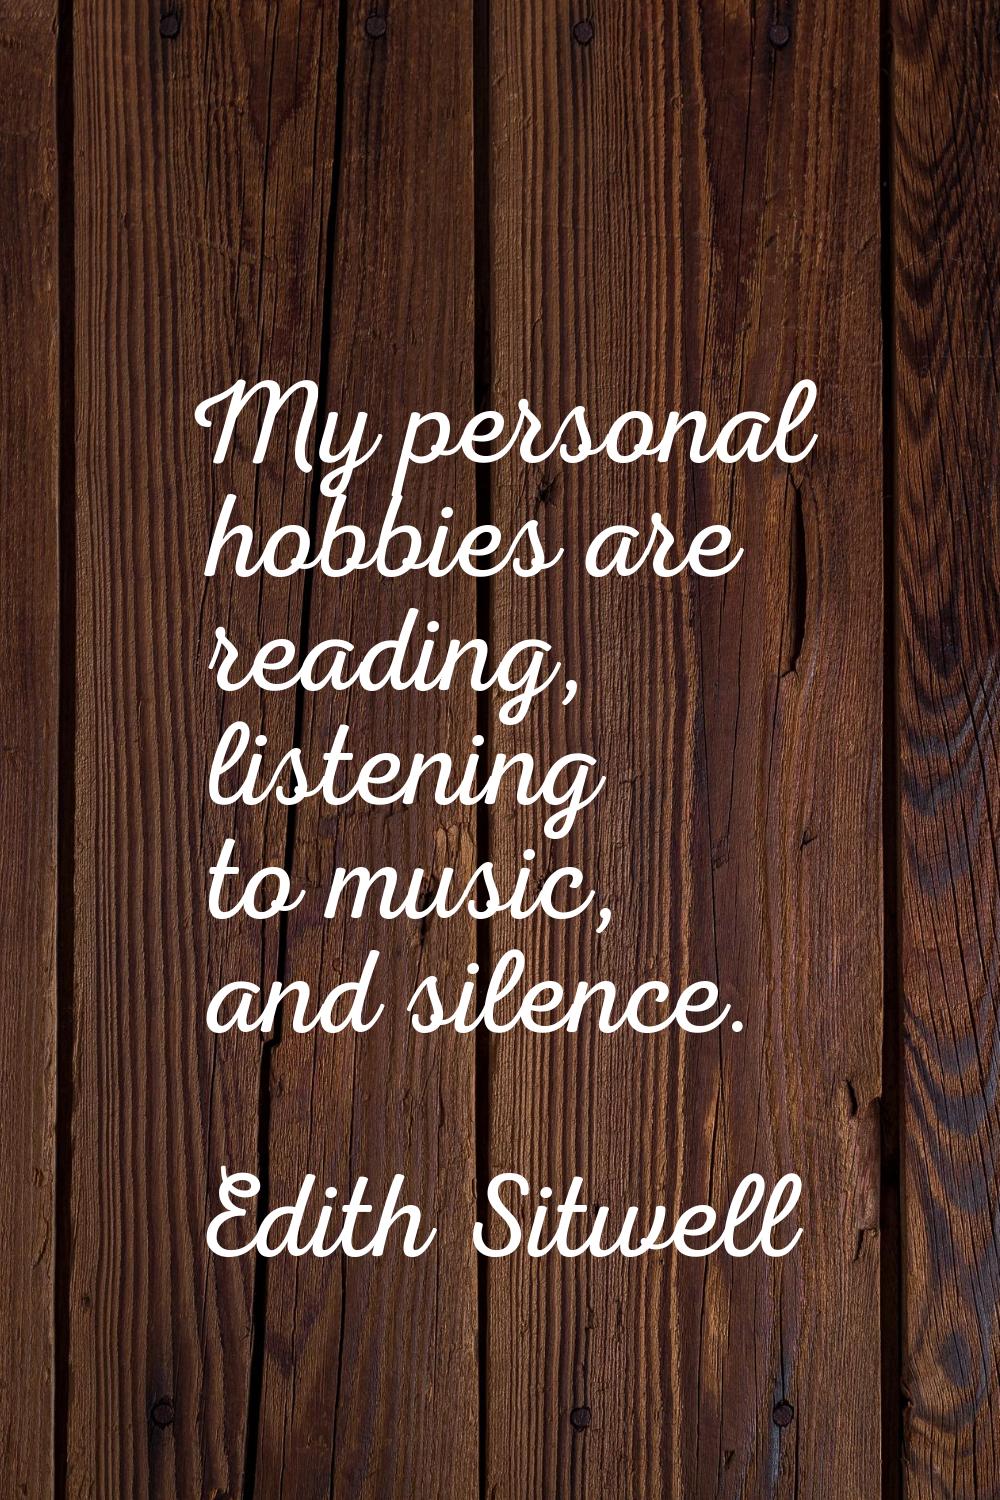 My personal hobbies are reading, listening to music, and silence.